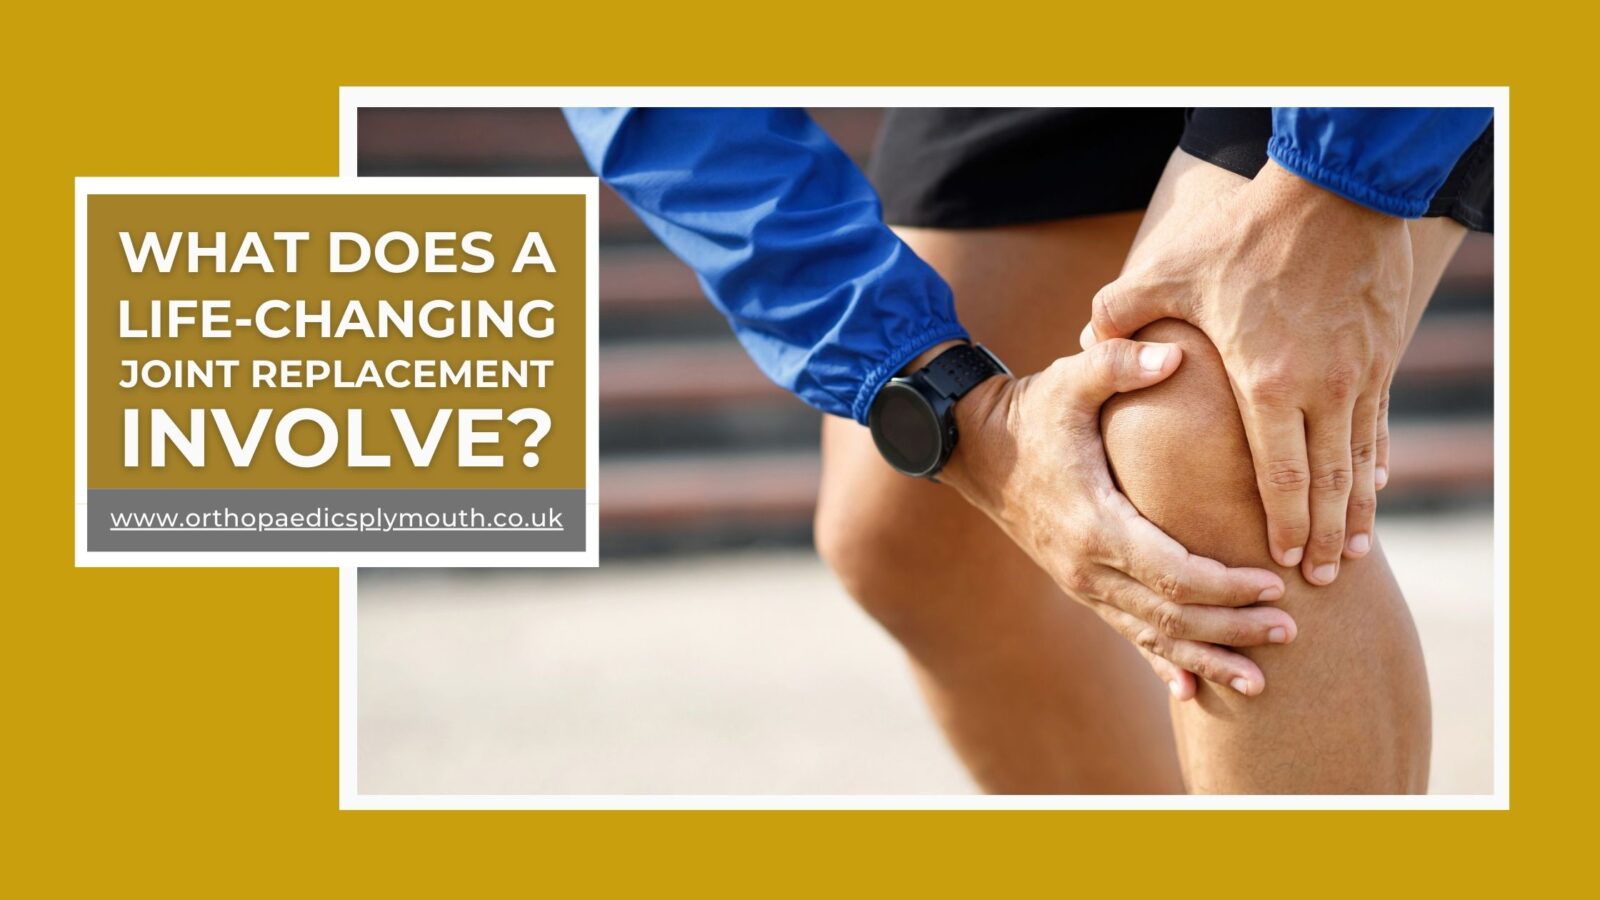 What does a life-changing joint replacement involve?